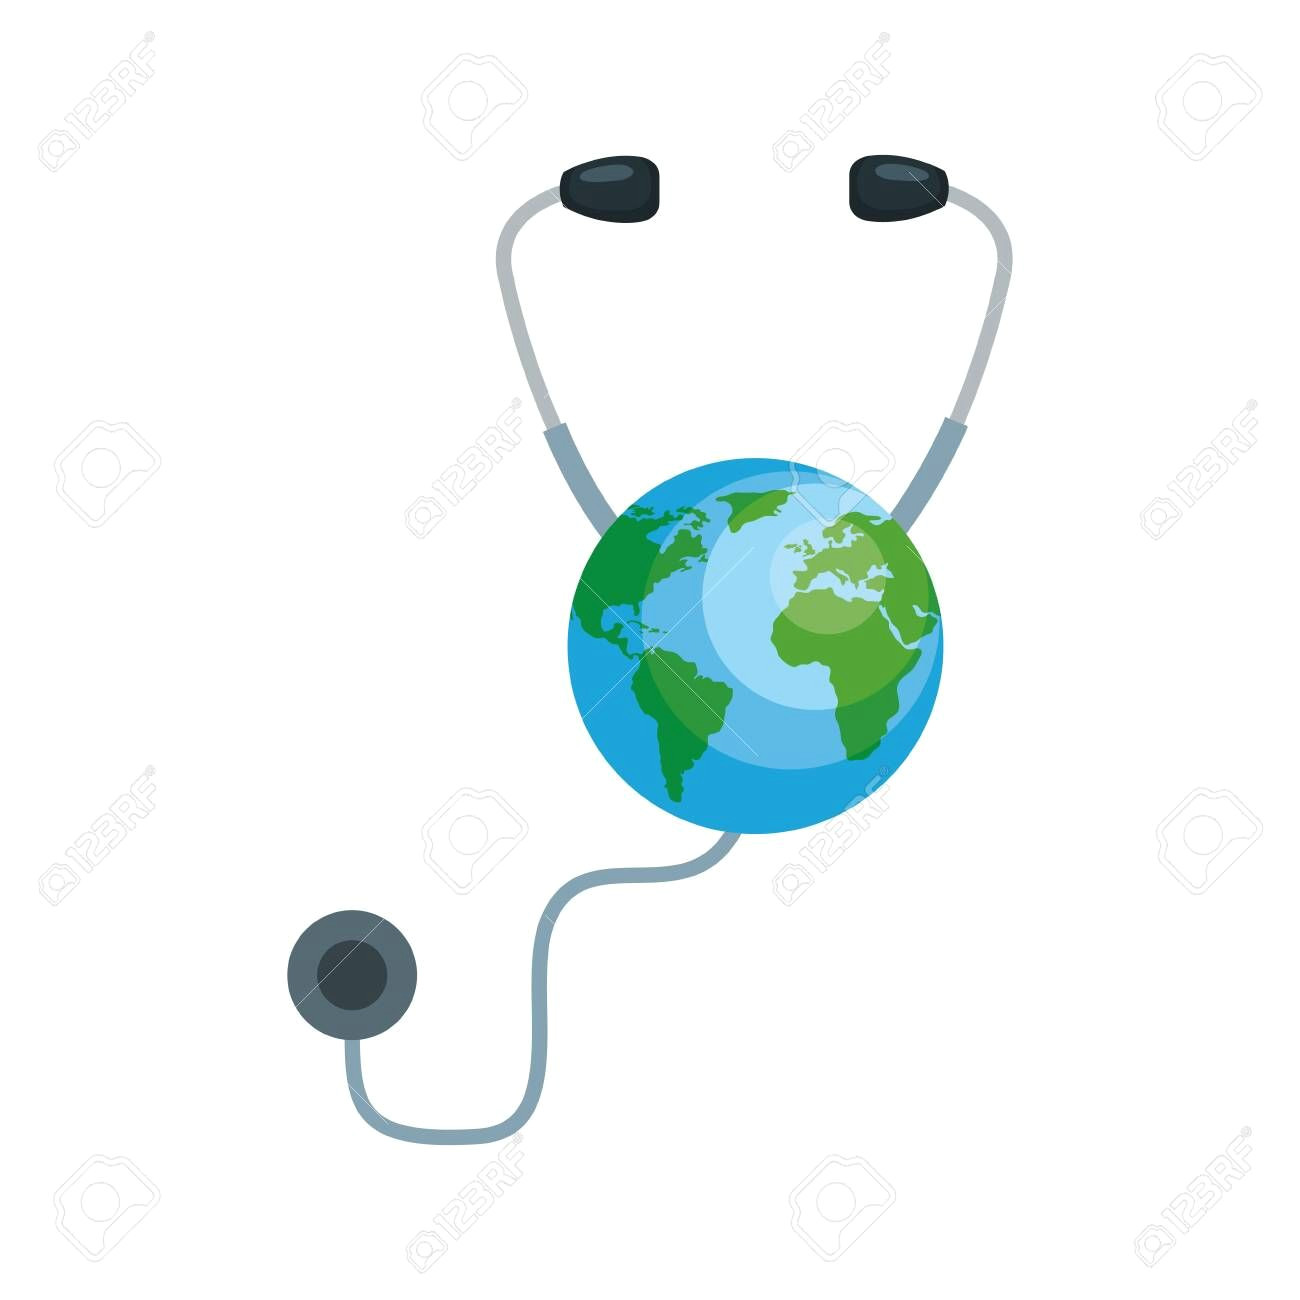 Stethoscope Drawing Easy Earth Planet with Stethoscope Cardio Device Vector